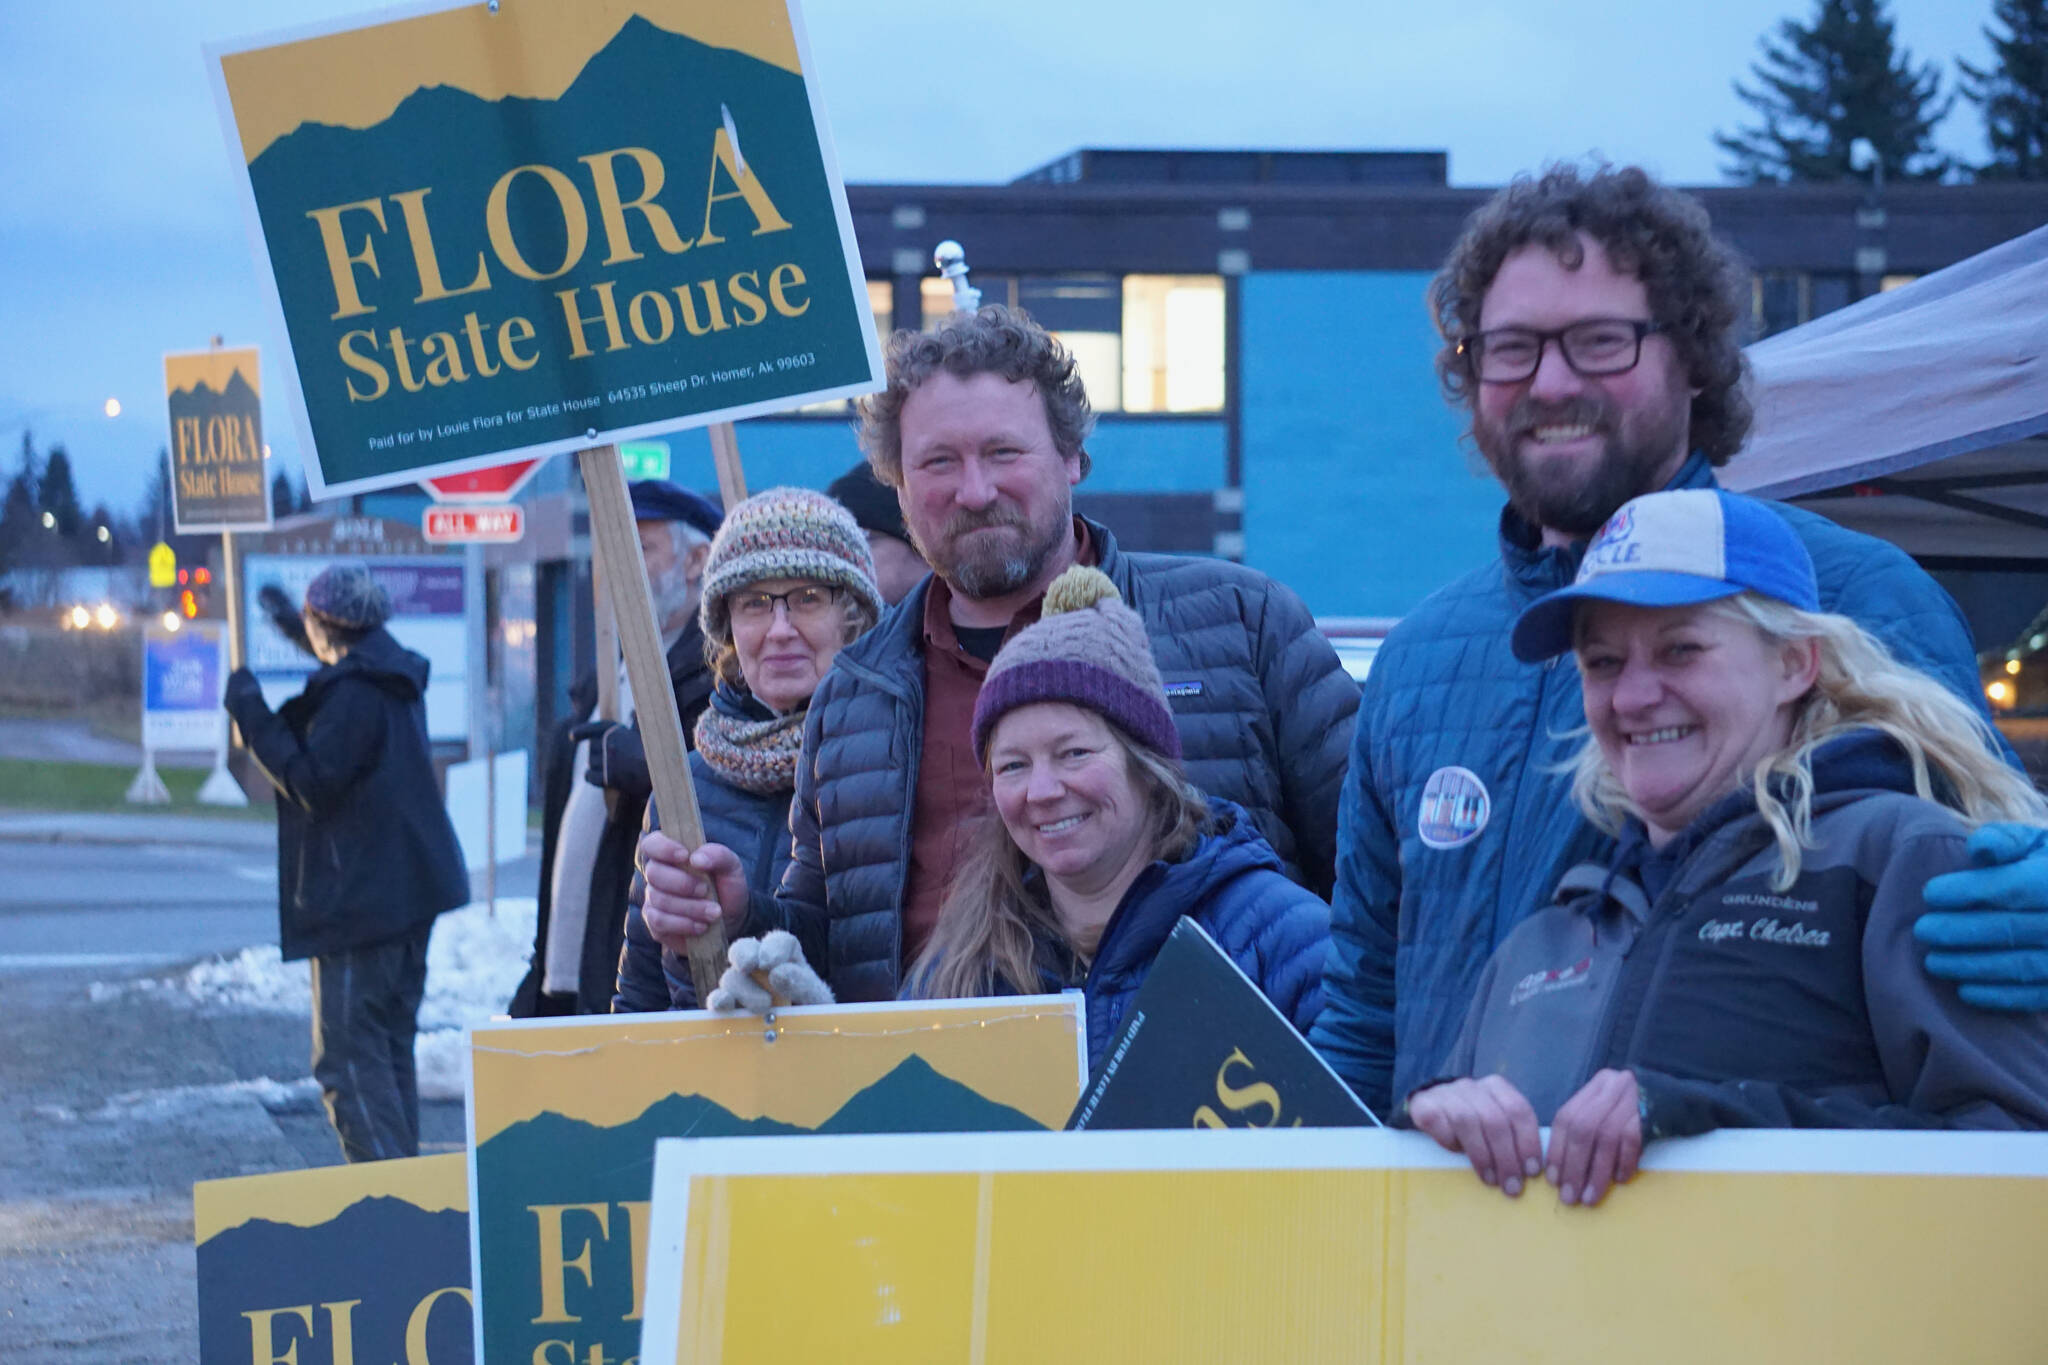 Louie Flora, center, a candidate for District 6 State House Representative, waves a sign on Tuesday, Nov. 8, 2022, on Pioneer Avenue in Homer, Alaska. Behind him is former Rep. Paul Seaton and Tina Seaton, and in front is his wife, Sarah Banks, brother Mikee Flora, and friend Chelsea Jones. (Photo by Michael Armstrong/Homer News)